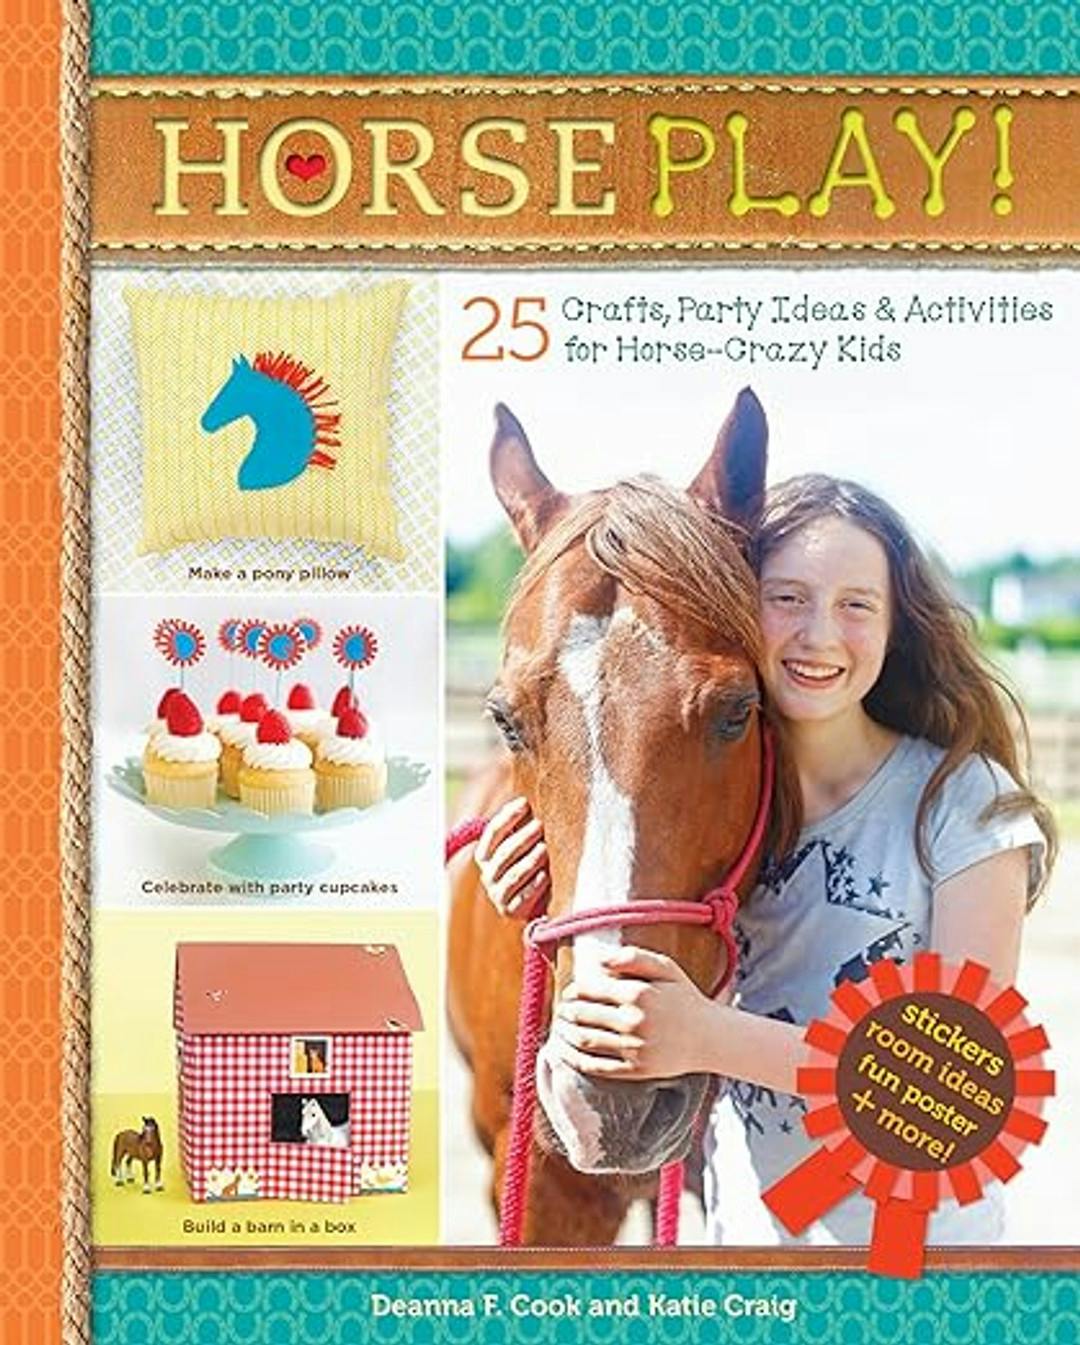 Horse Play! 25 Crafts, Party Ideas and Activities for Horse-Crazy Kids